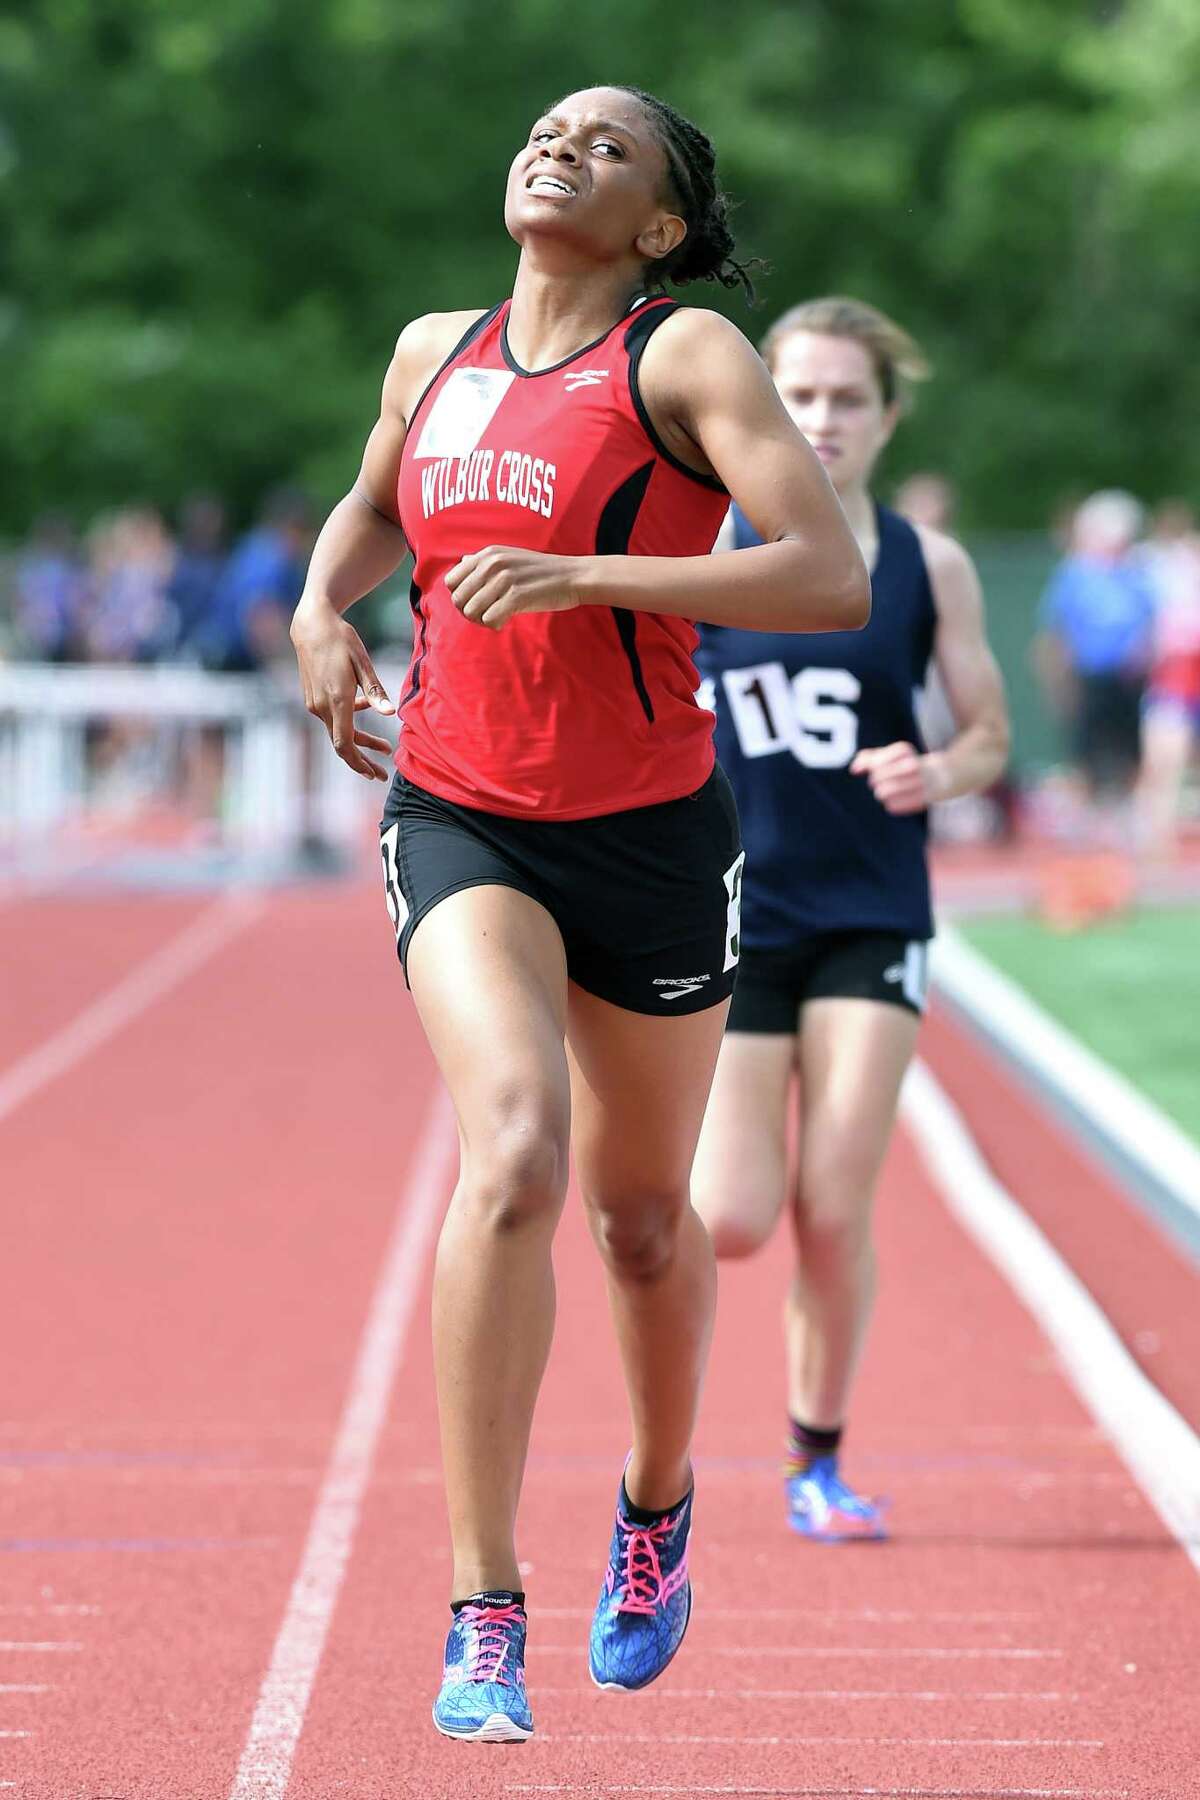 Danae Rivers of Wilbur Cross wins the 1600 meter run ahead of Hannah DeBalsi of Staples at the CIAC Track & Field State Open in New Britain on 6/8/2015. Photo by Arnold Gold/New Haven Register agold@newhavenregister.com